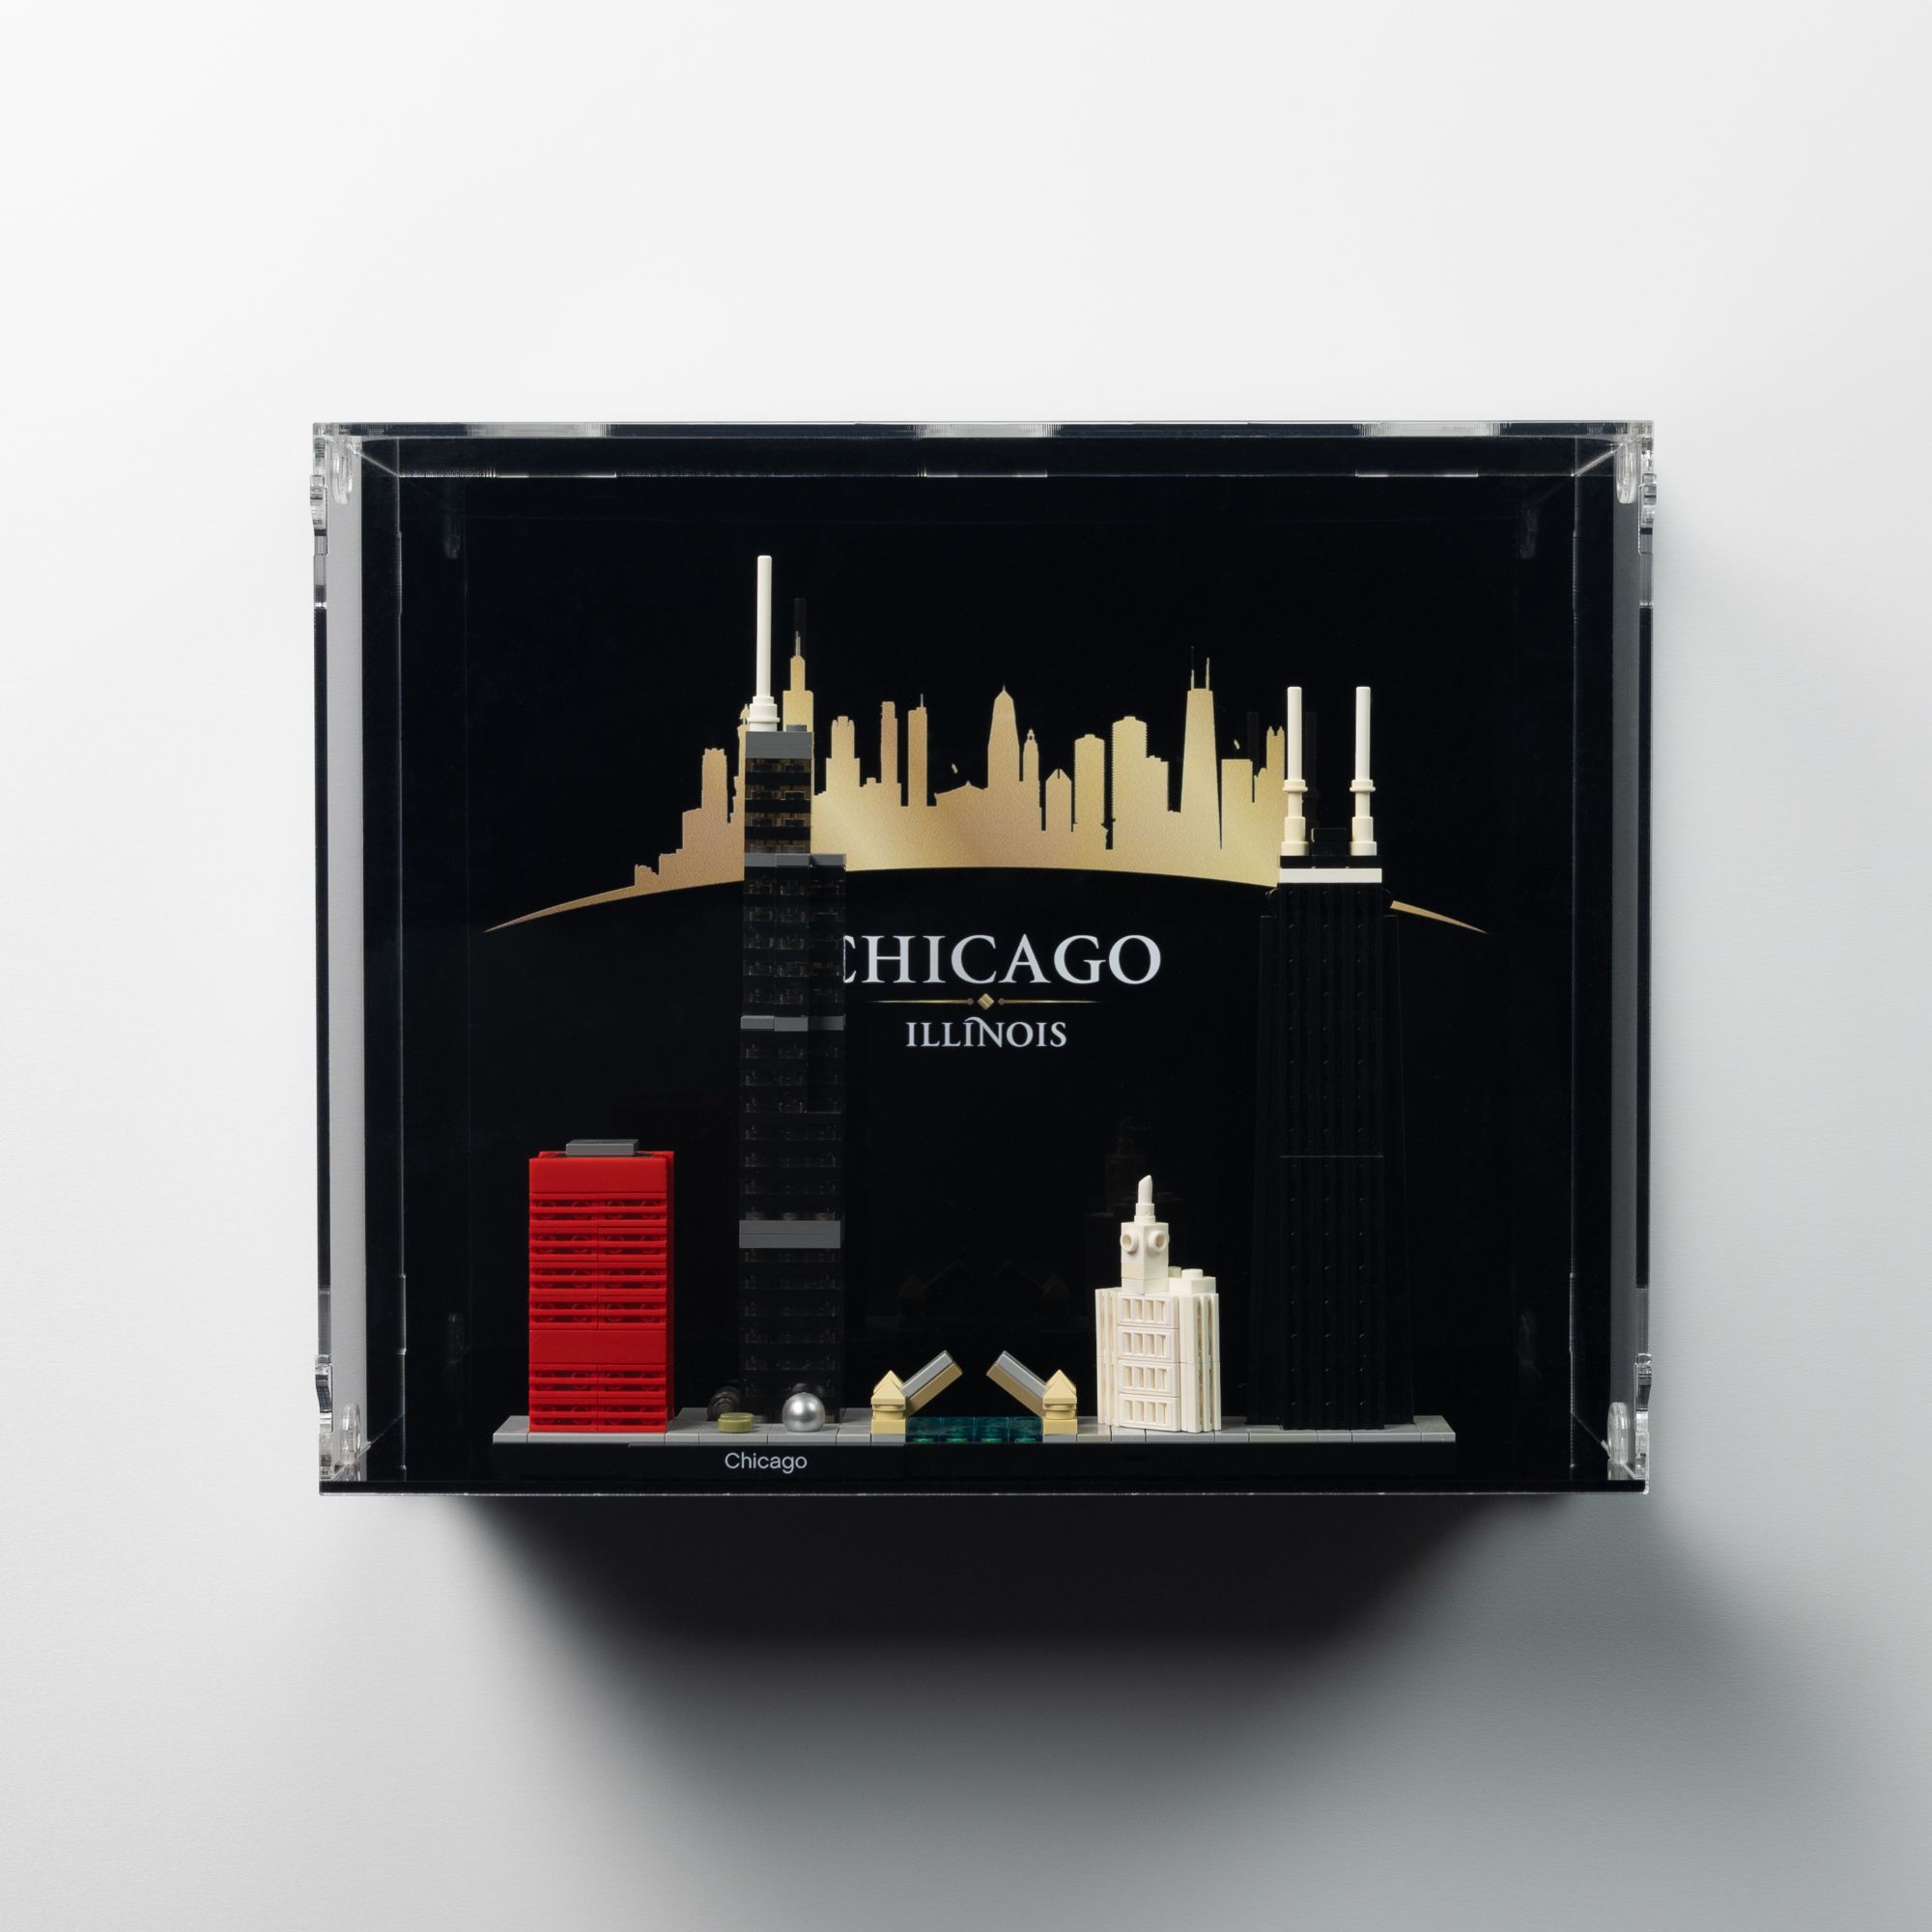 LEGO Chicago in Display Case